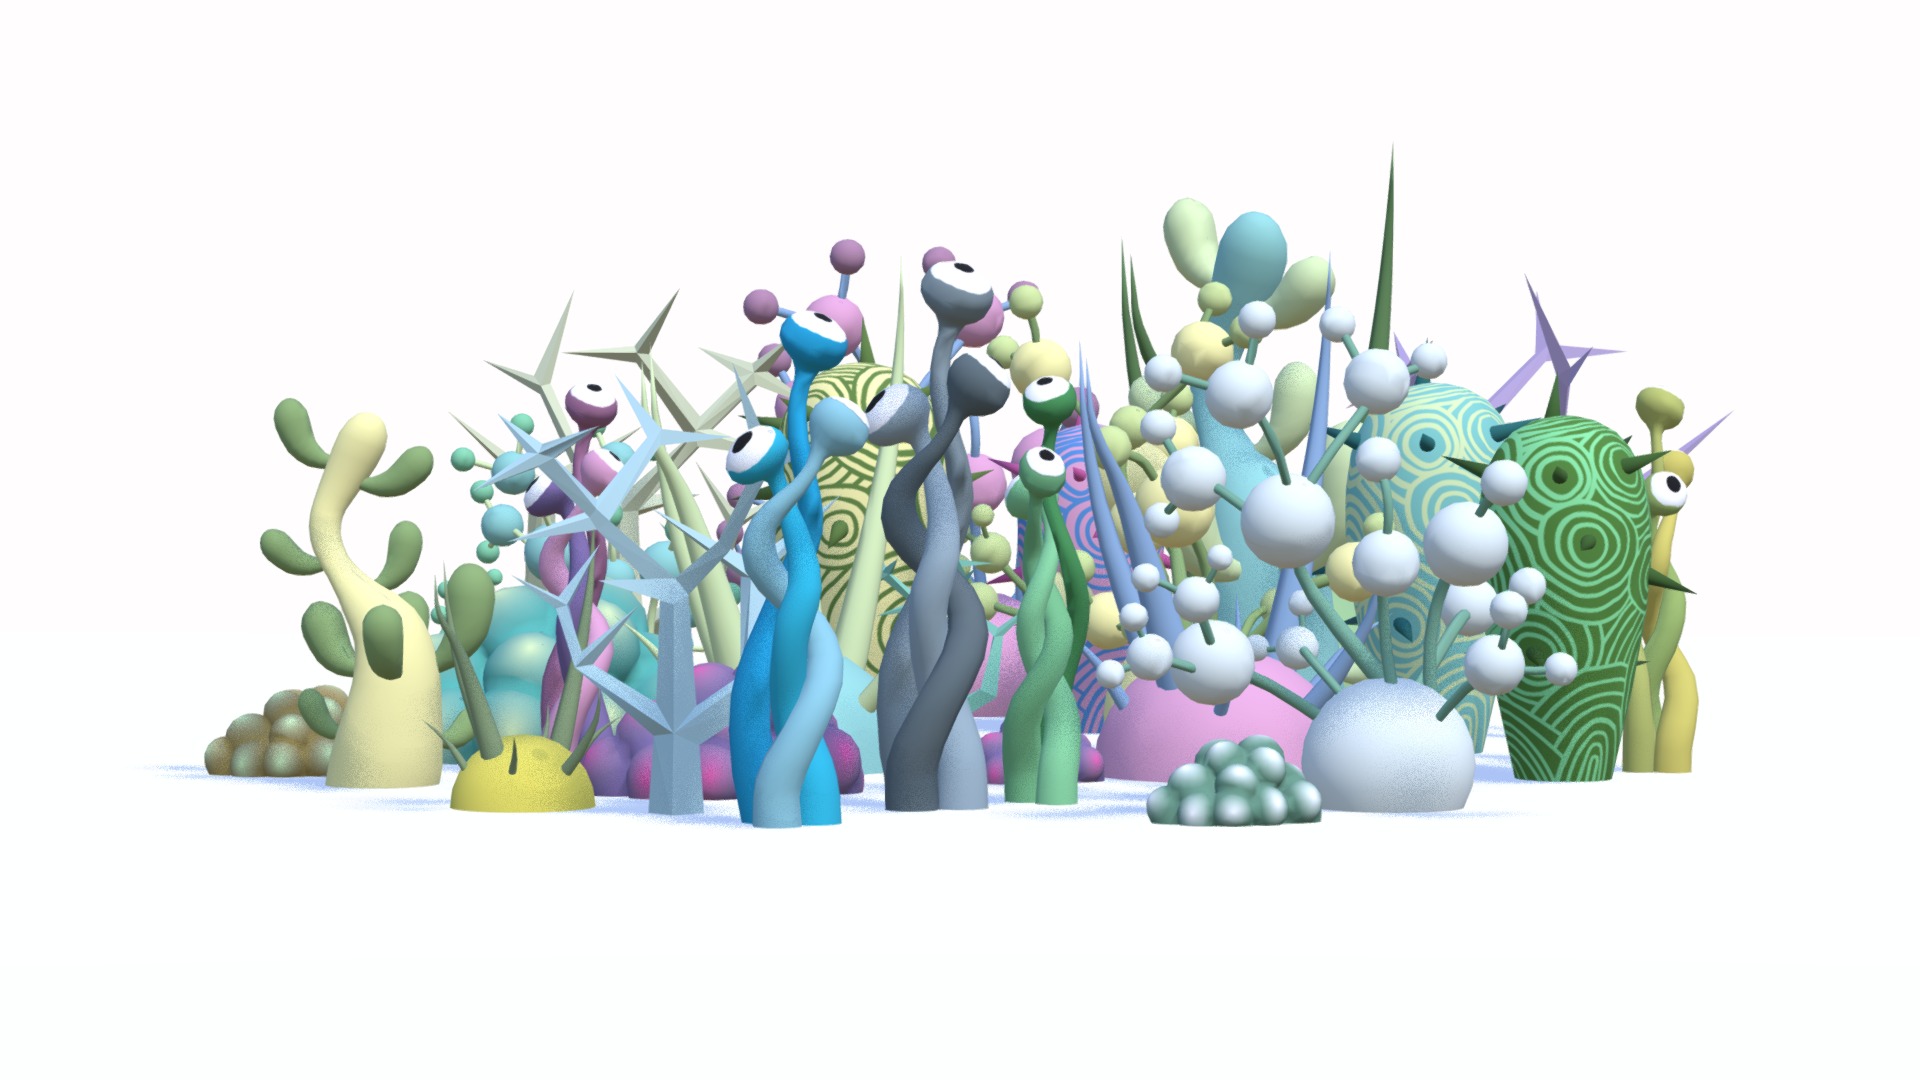 3D model Alien Toon Plants - This is a 3D model of the Alien Toon Plants. The 3D model is about a group of colorful objects.